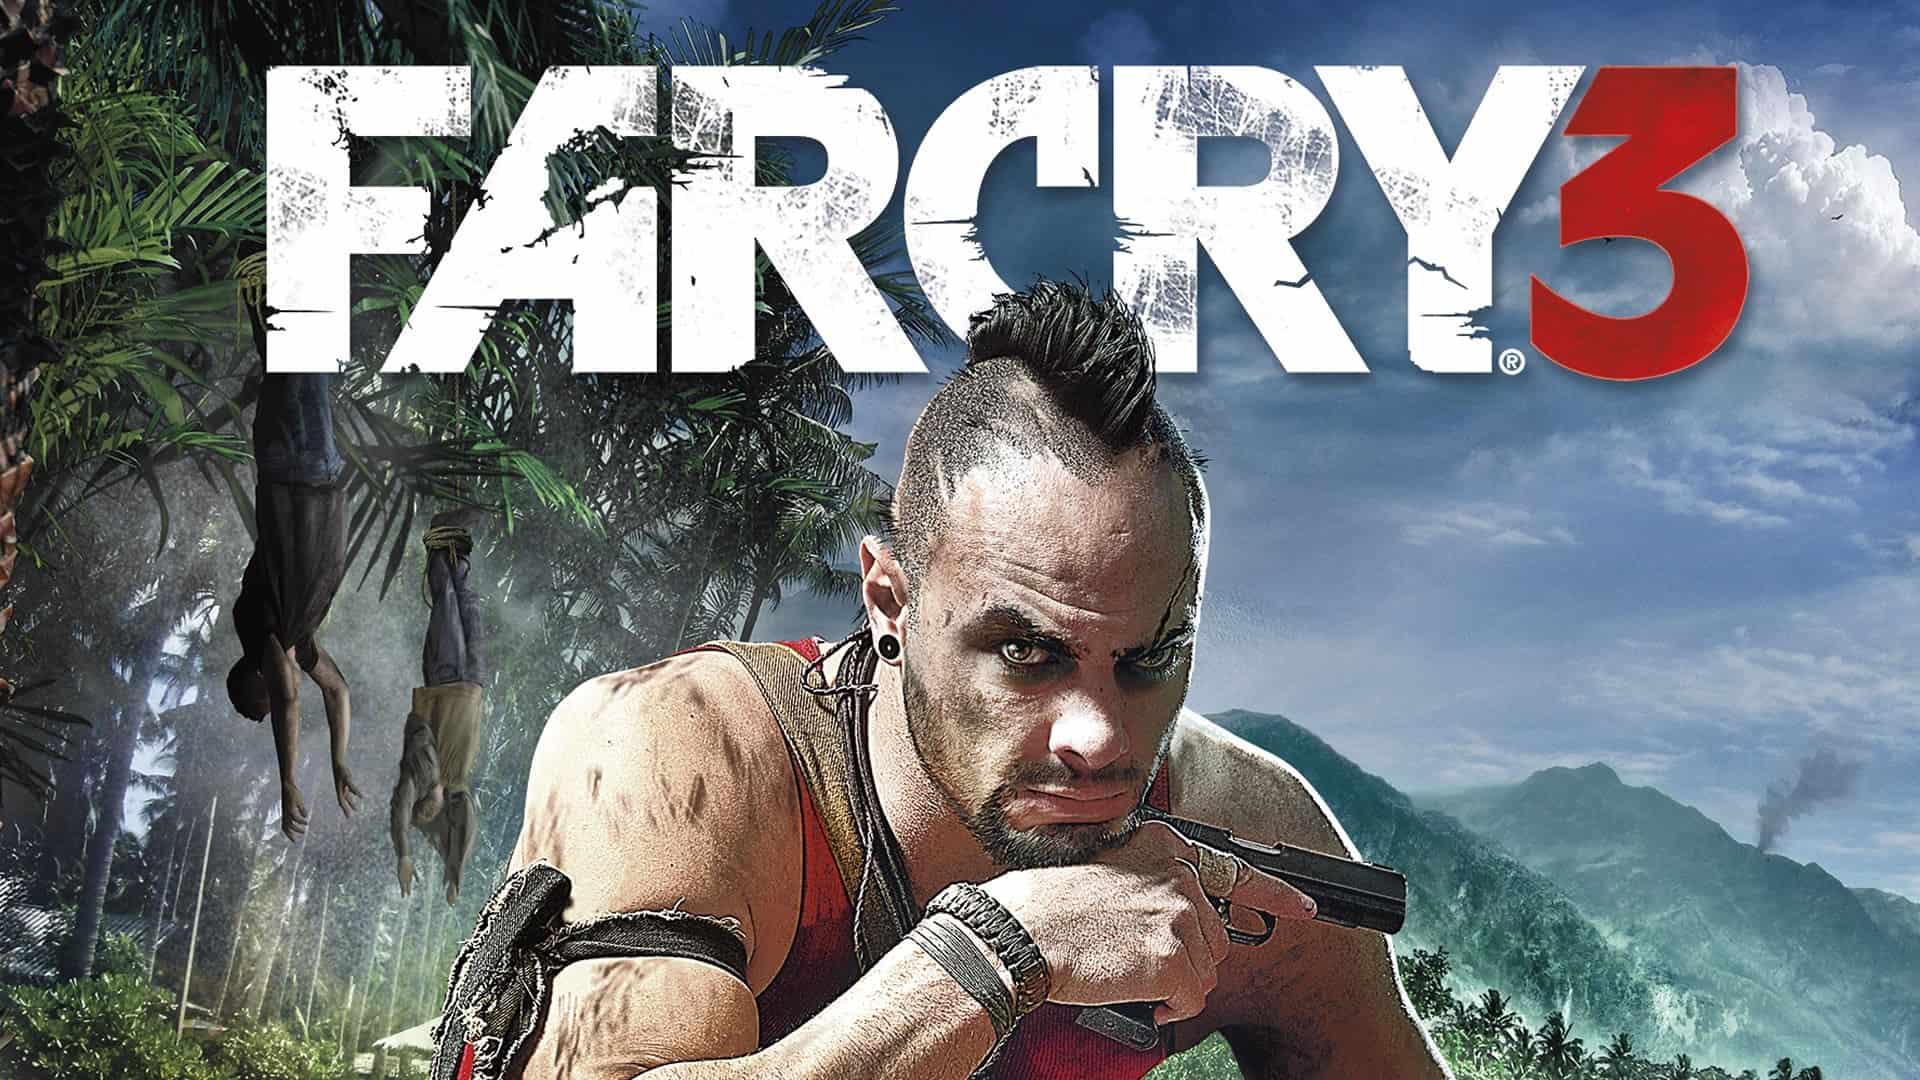 far cry 3 game save